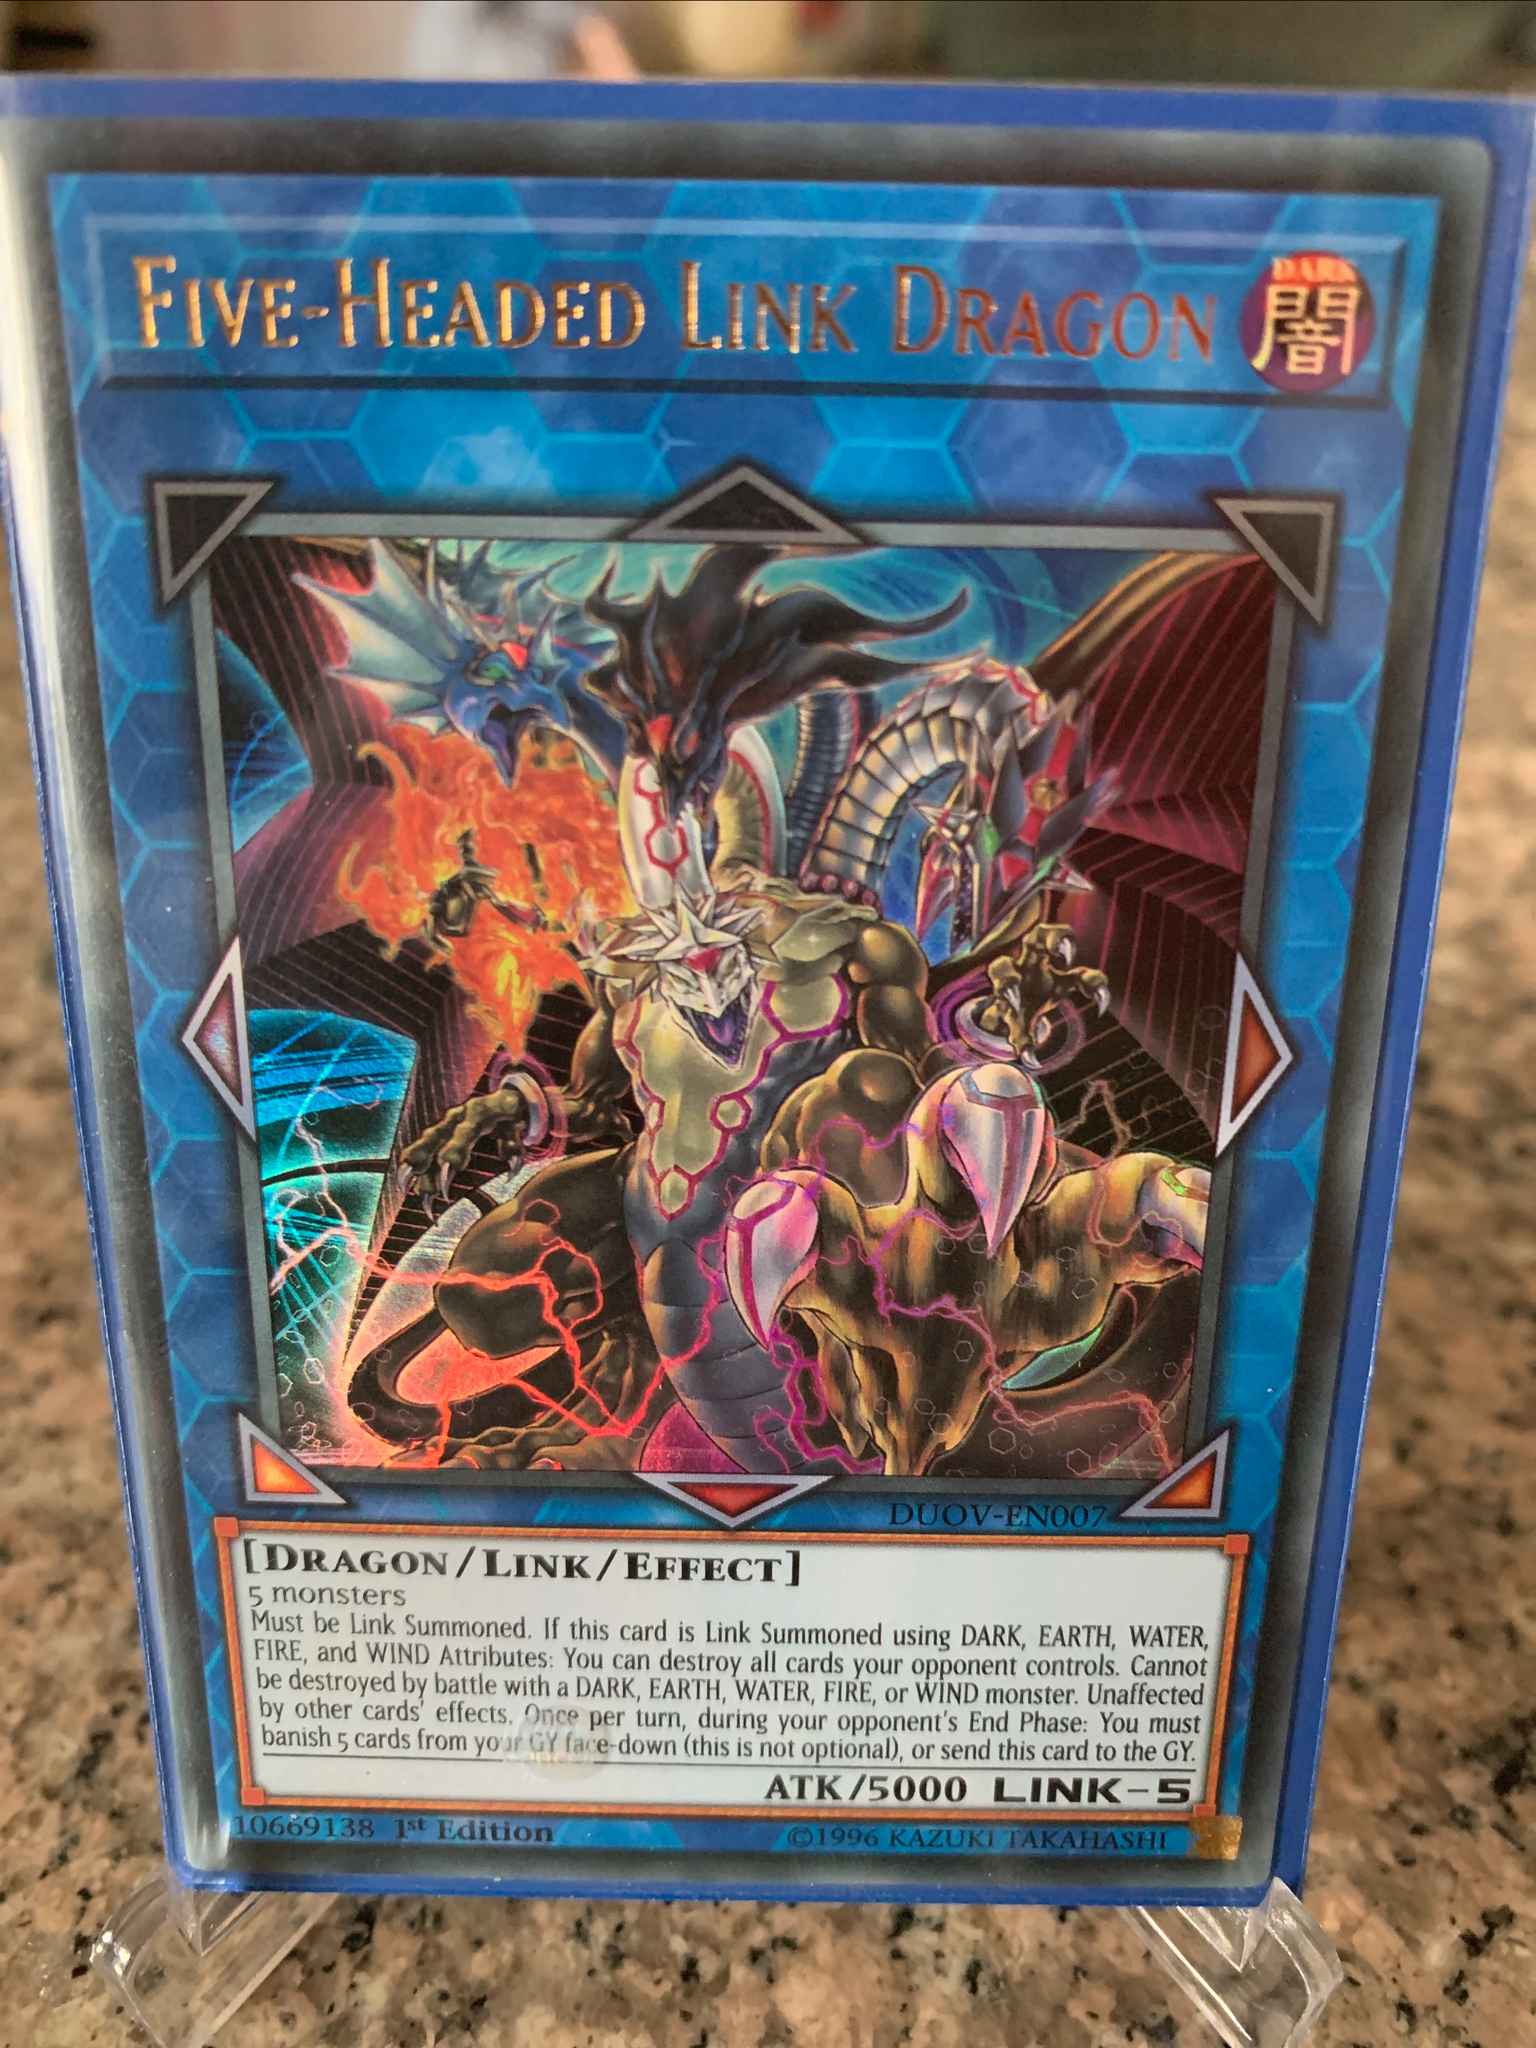 European Print Link Dragon Five Headed Link Dragon Duel Overload Yugioh Online Gaming Store For Cards Miniatures Singles Packs Booster Boxes